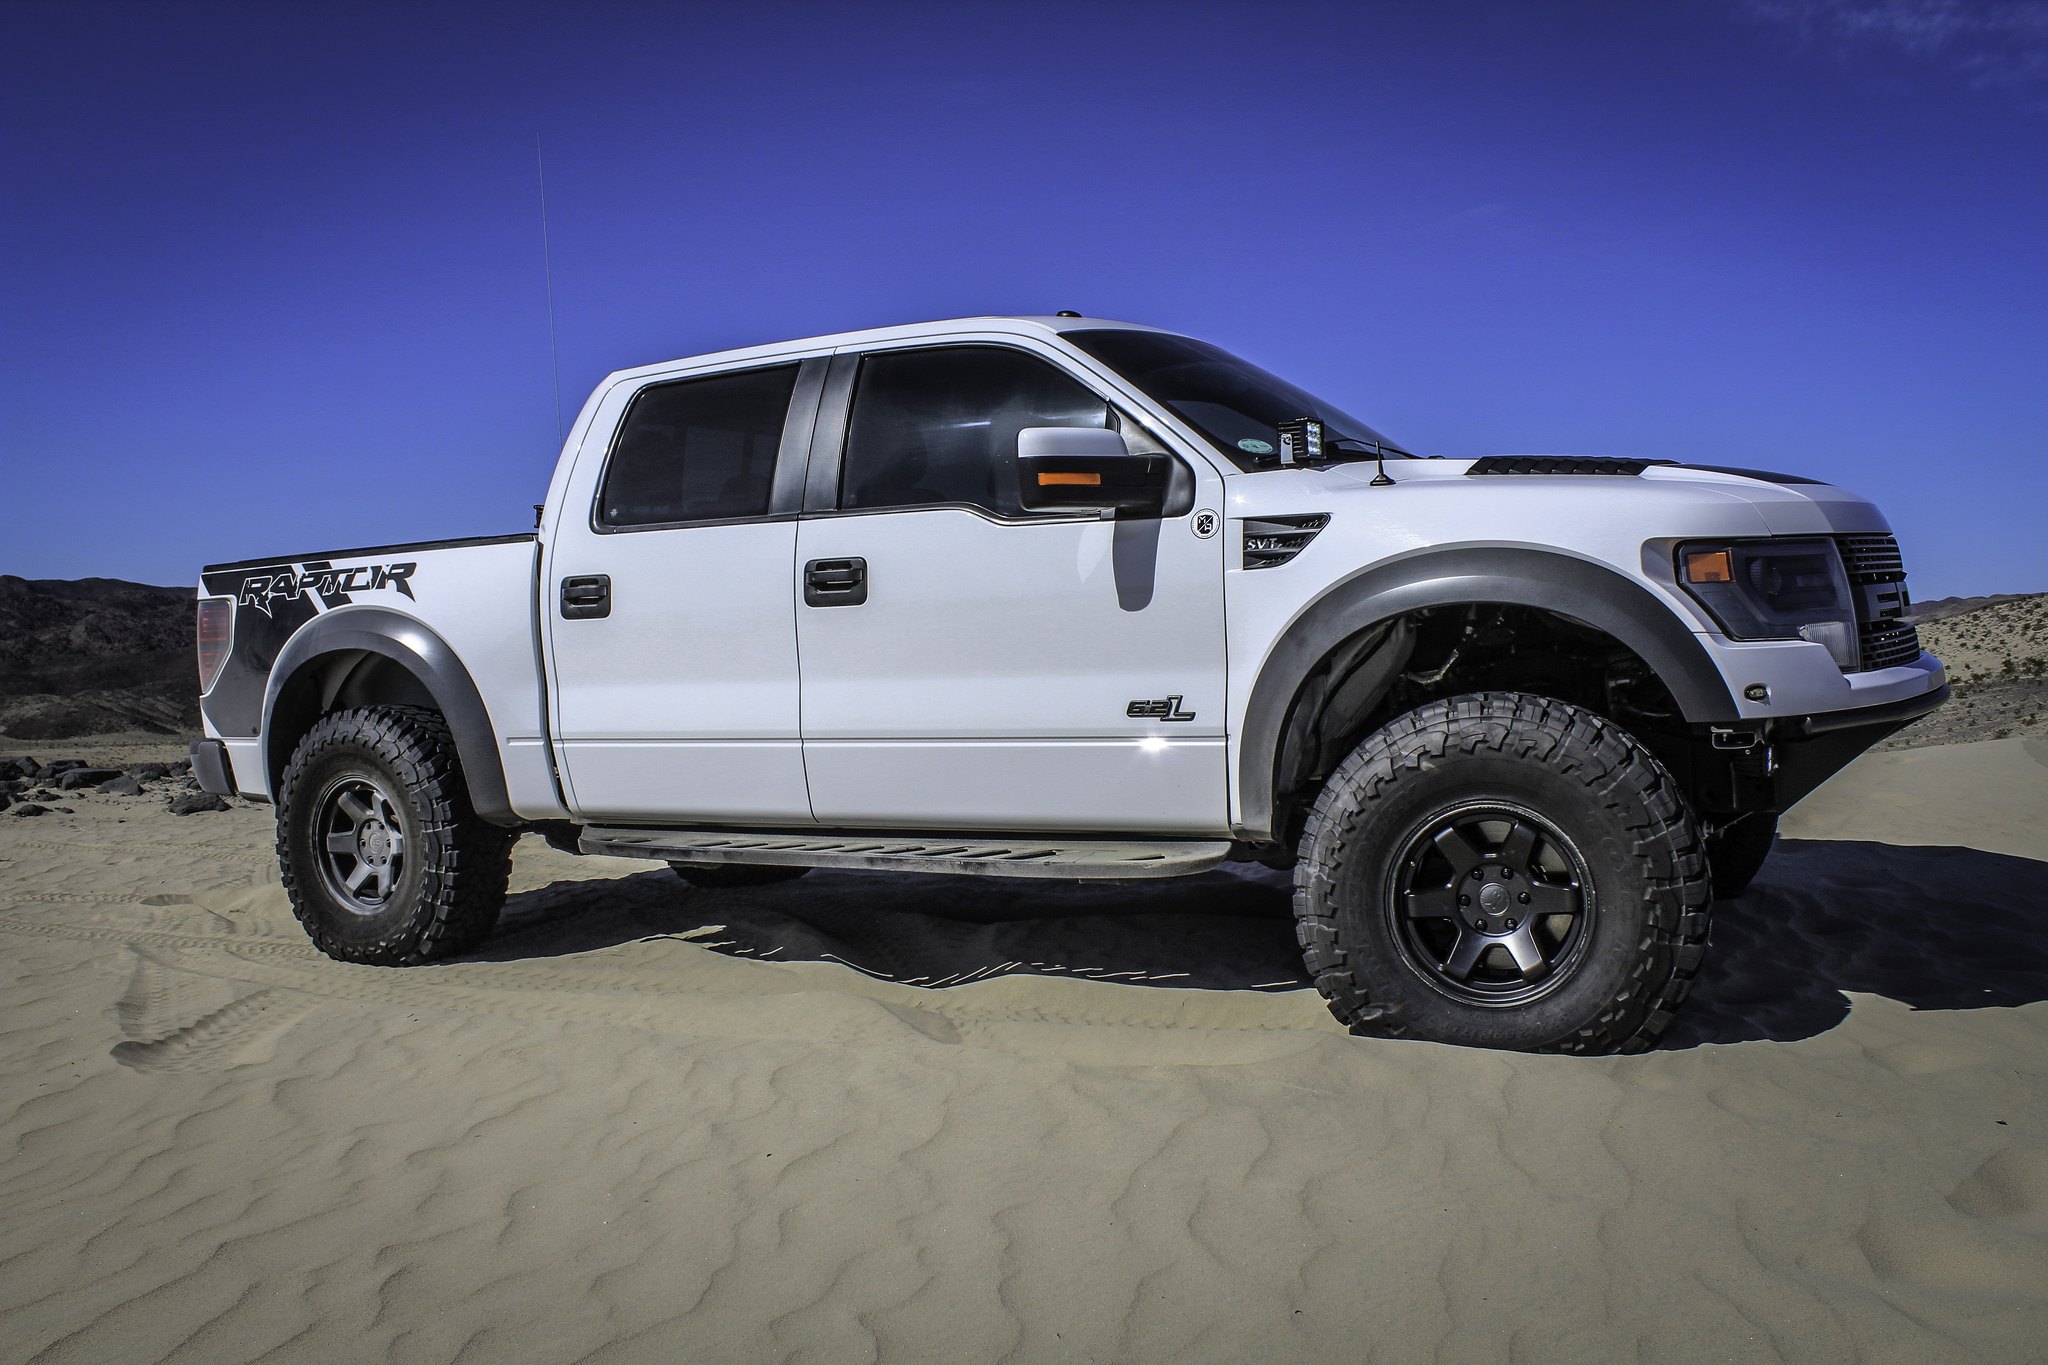 Aftermarket Running Boards on White Ford F-150 SVT - Photo by Black Rhino Wheels